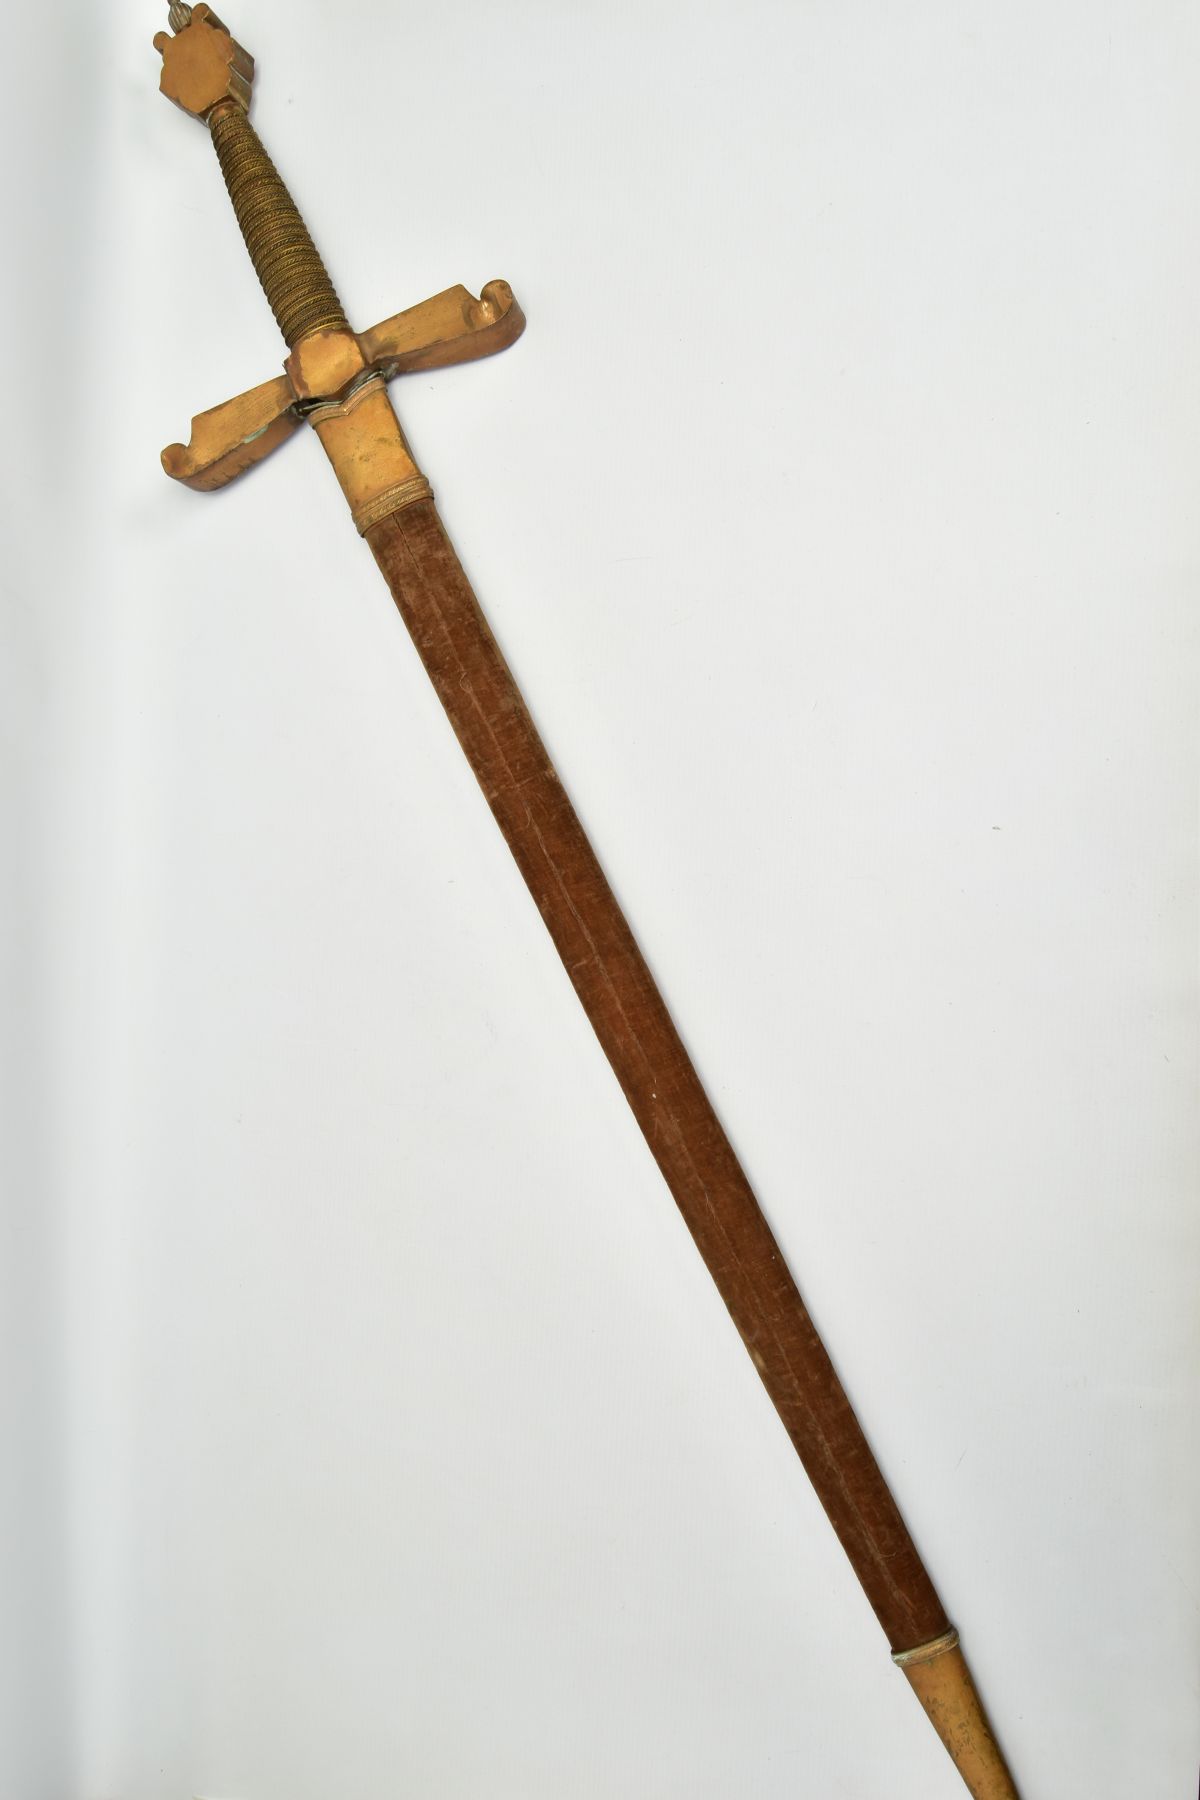 TWO ASIAN/INDIAN TOURIST STYLE CURVED SWORDS in wooden and suede scabbards, one id marked made in - Image 13 of 13